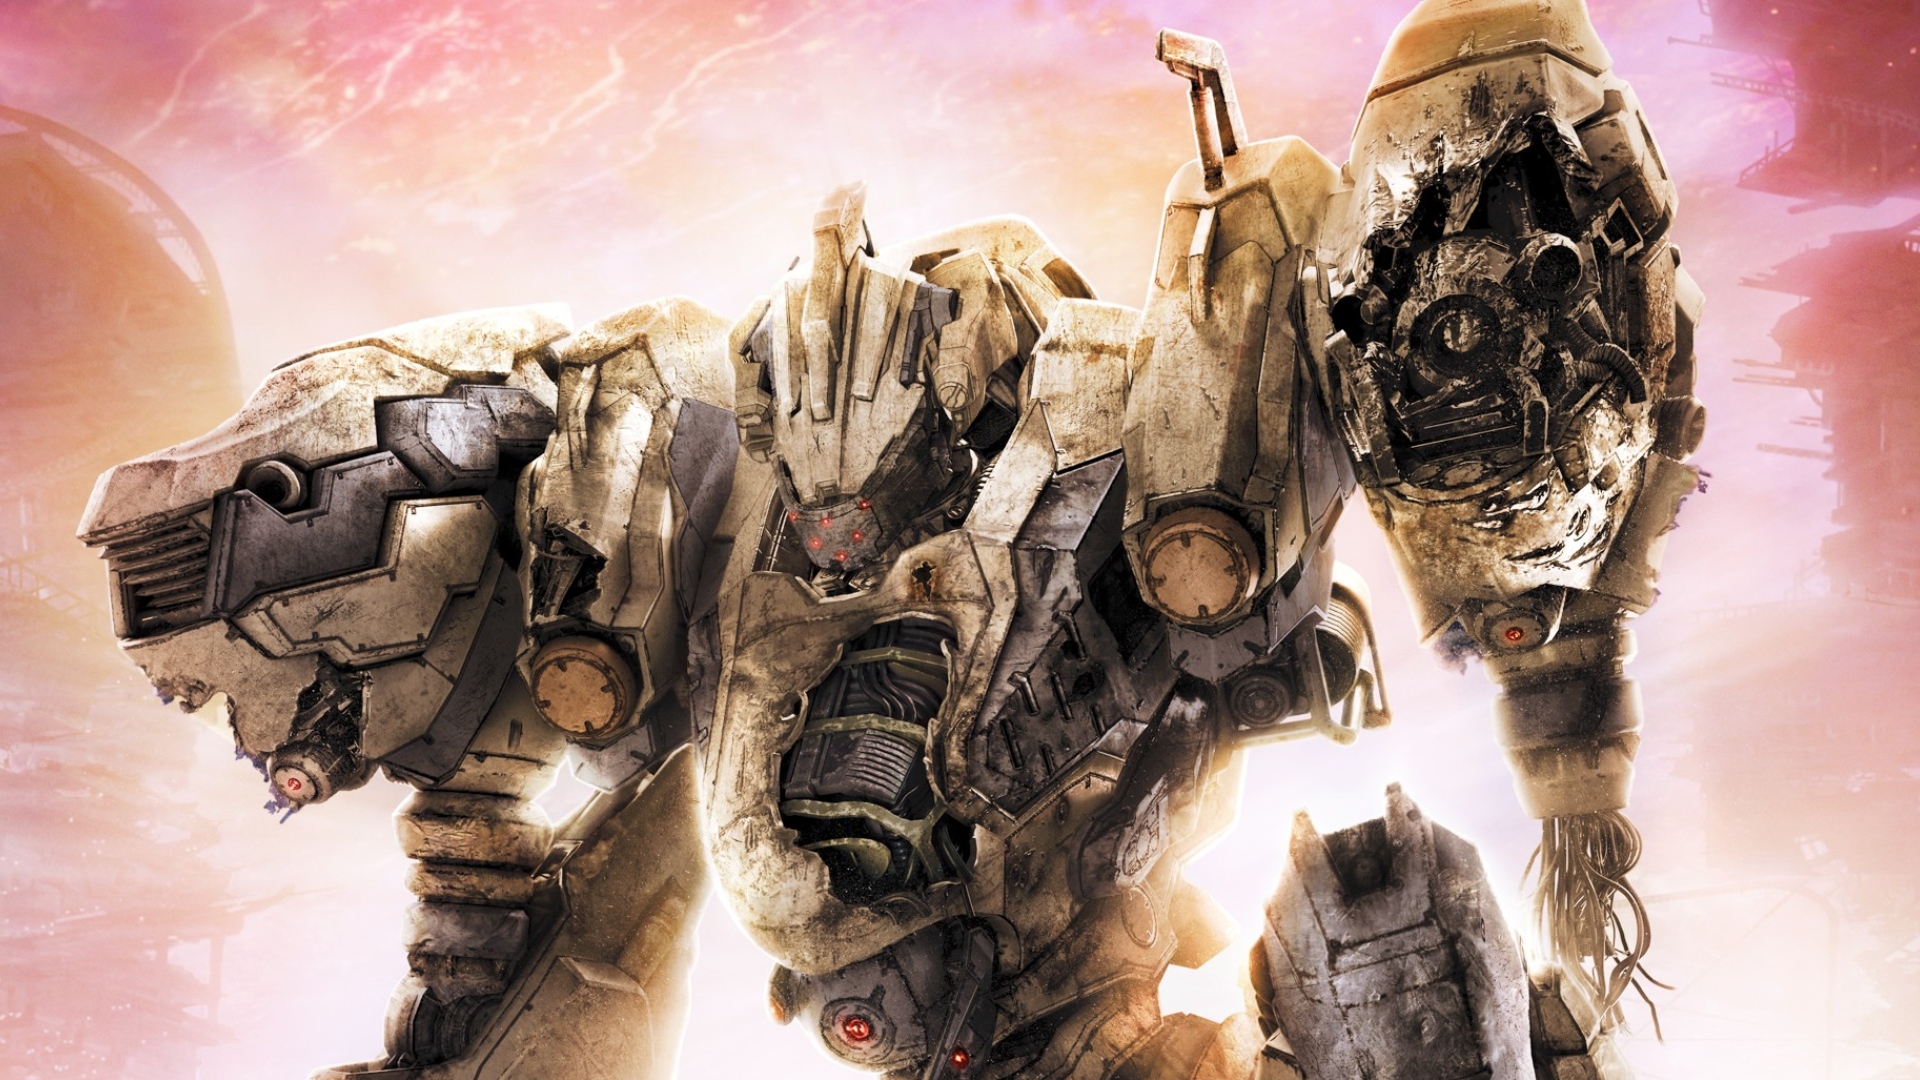 Armored Core 6 Gets New Story and Multiplayer Details